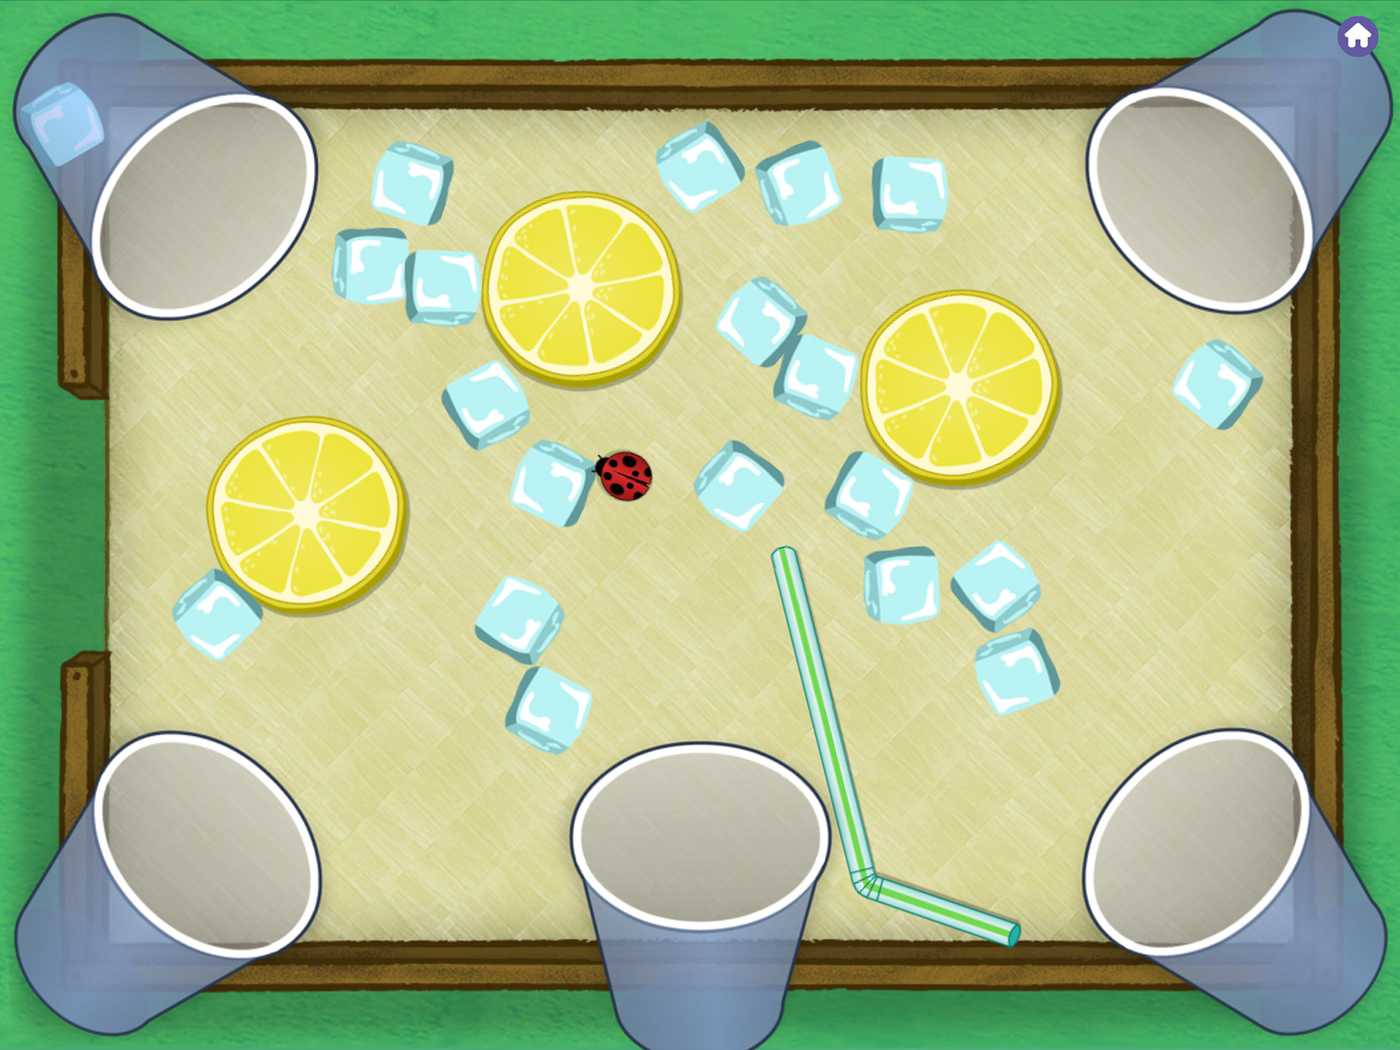 A game screen with a top down view of a table with cups, ice cubes, lemons, a ladybug and a straw.